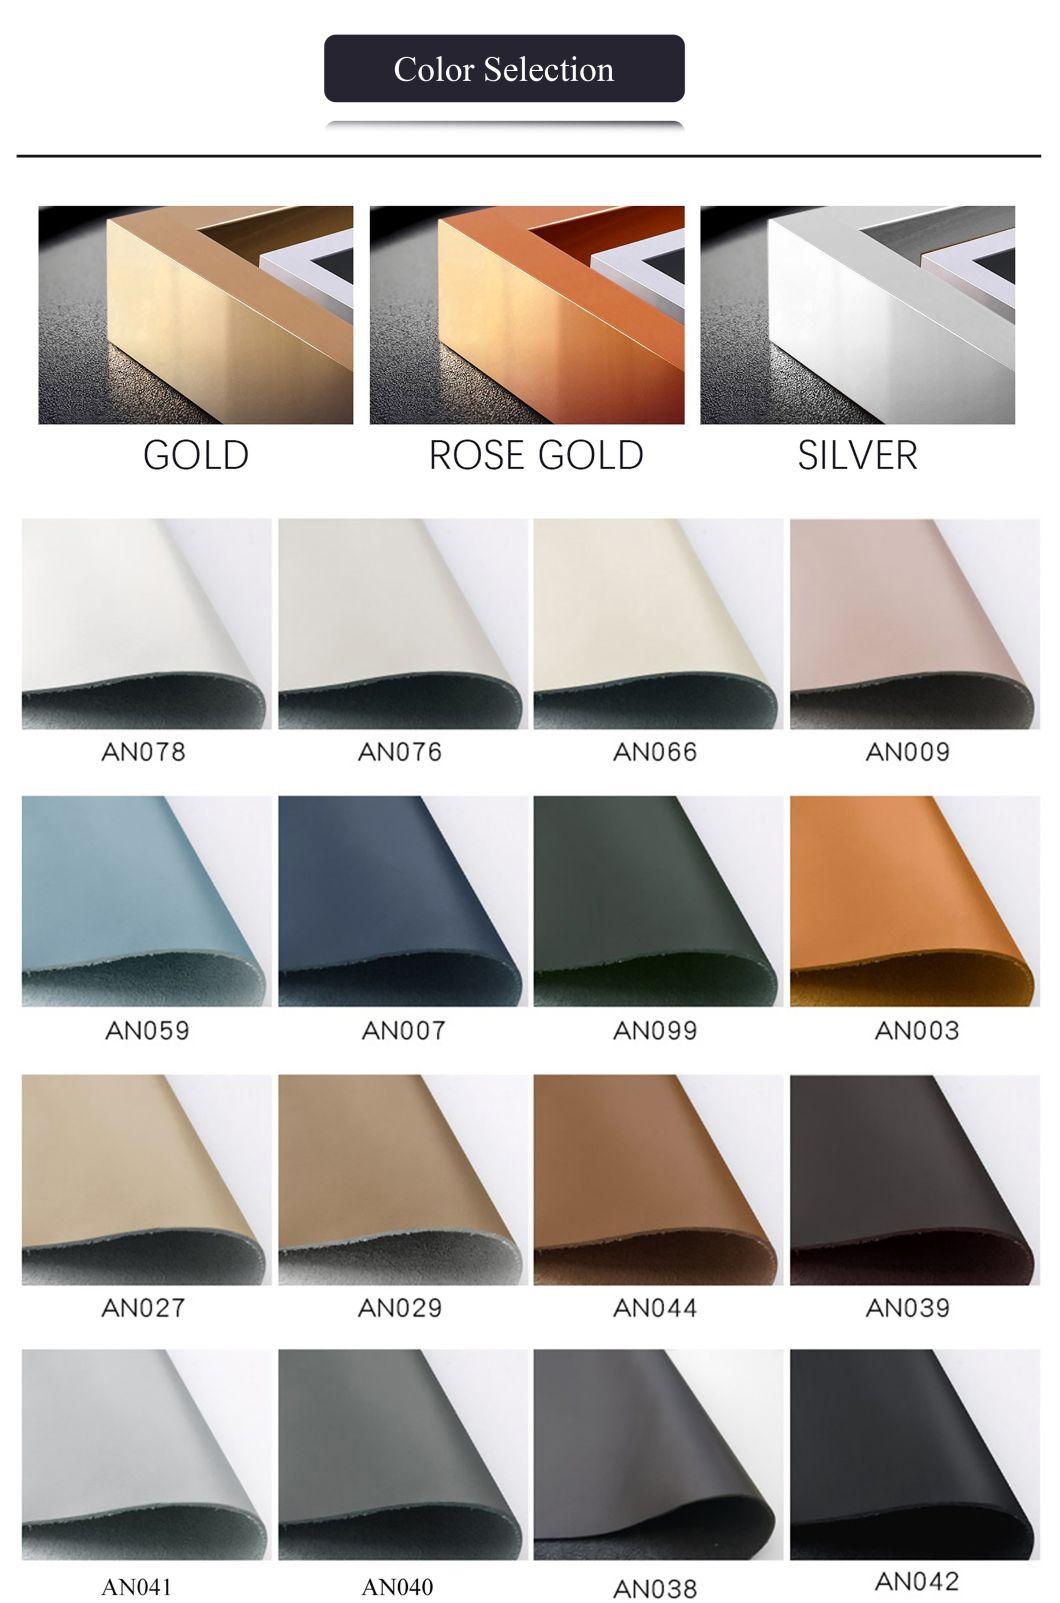 Leather Cushion Wholesale Gold Stainless Steel Banquet Hall Furniture Used Banquet Chairs